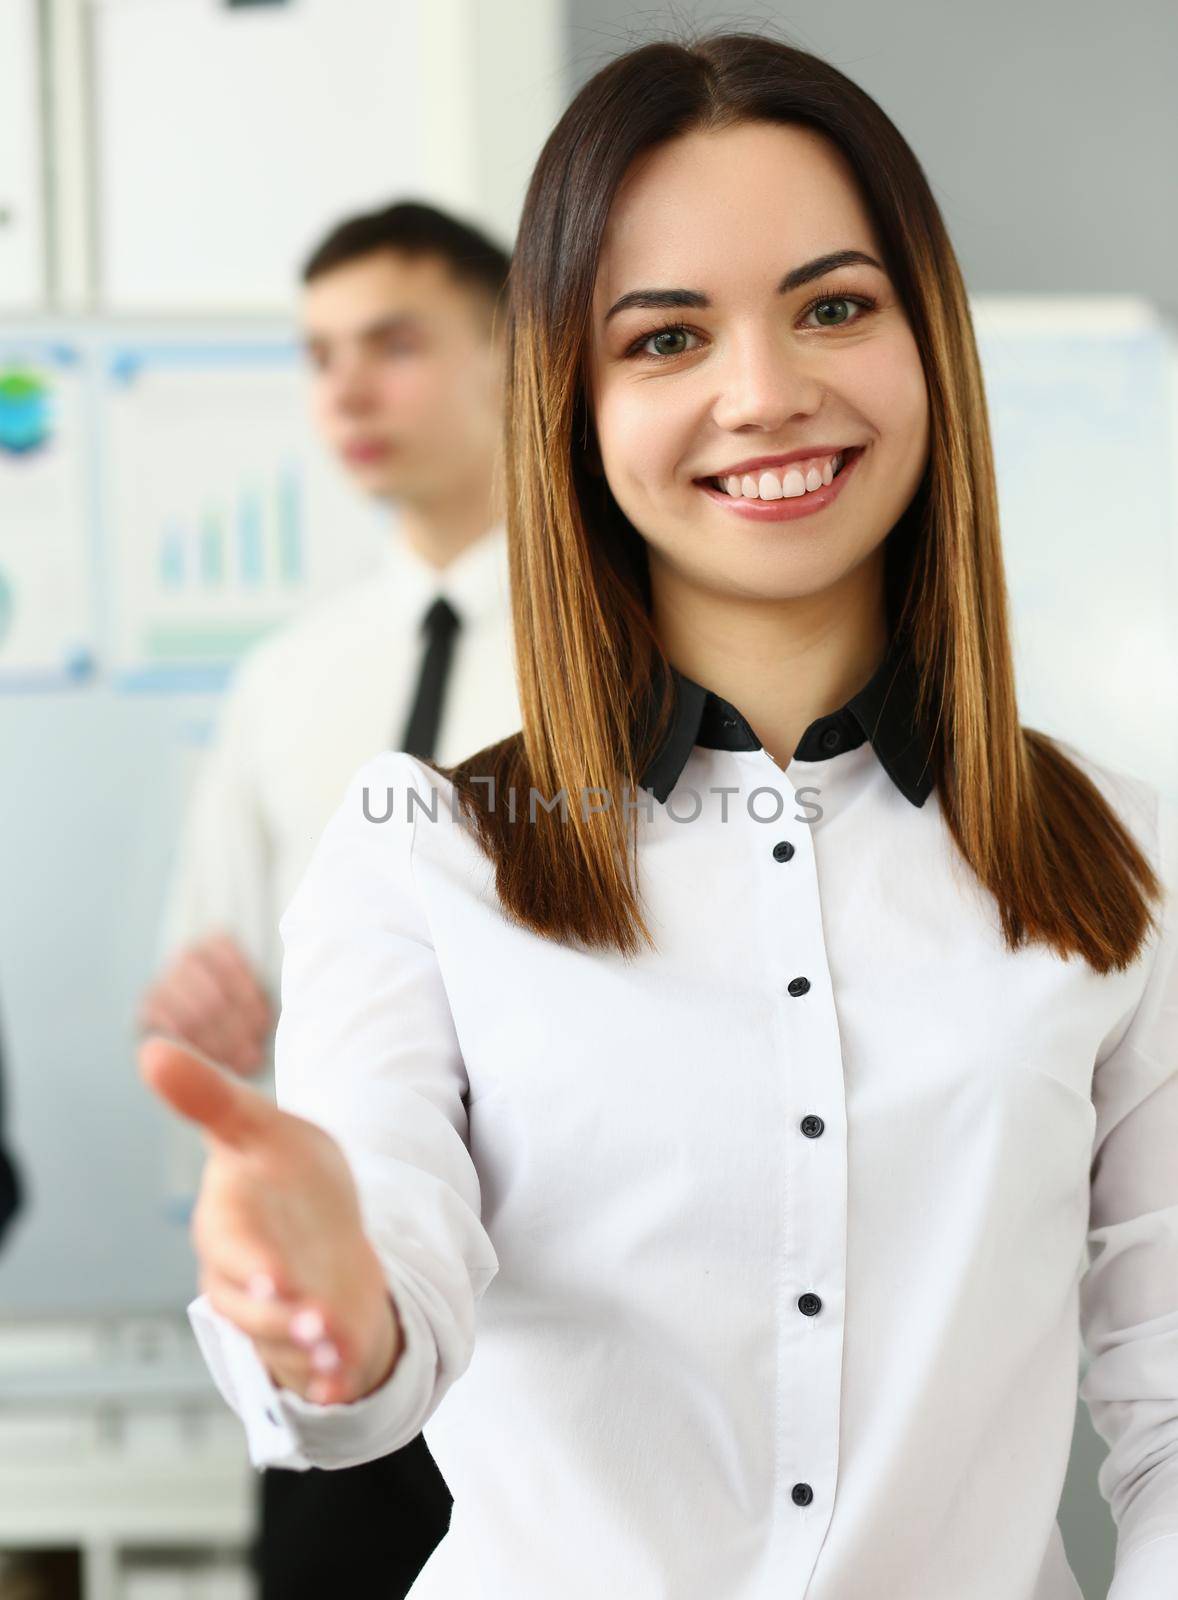 Smiling young business woman politely greets company office. Business consultant and team